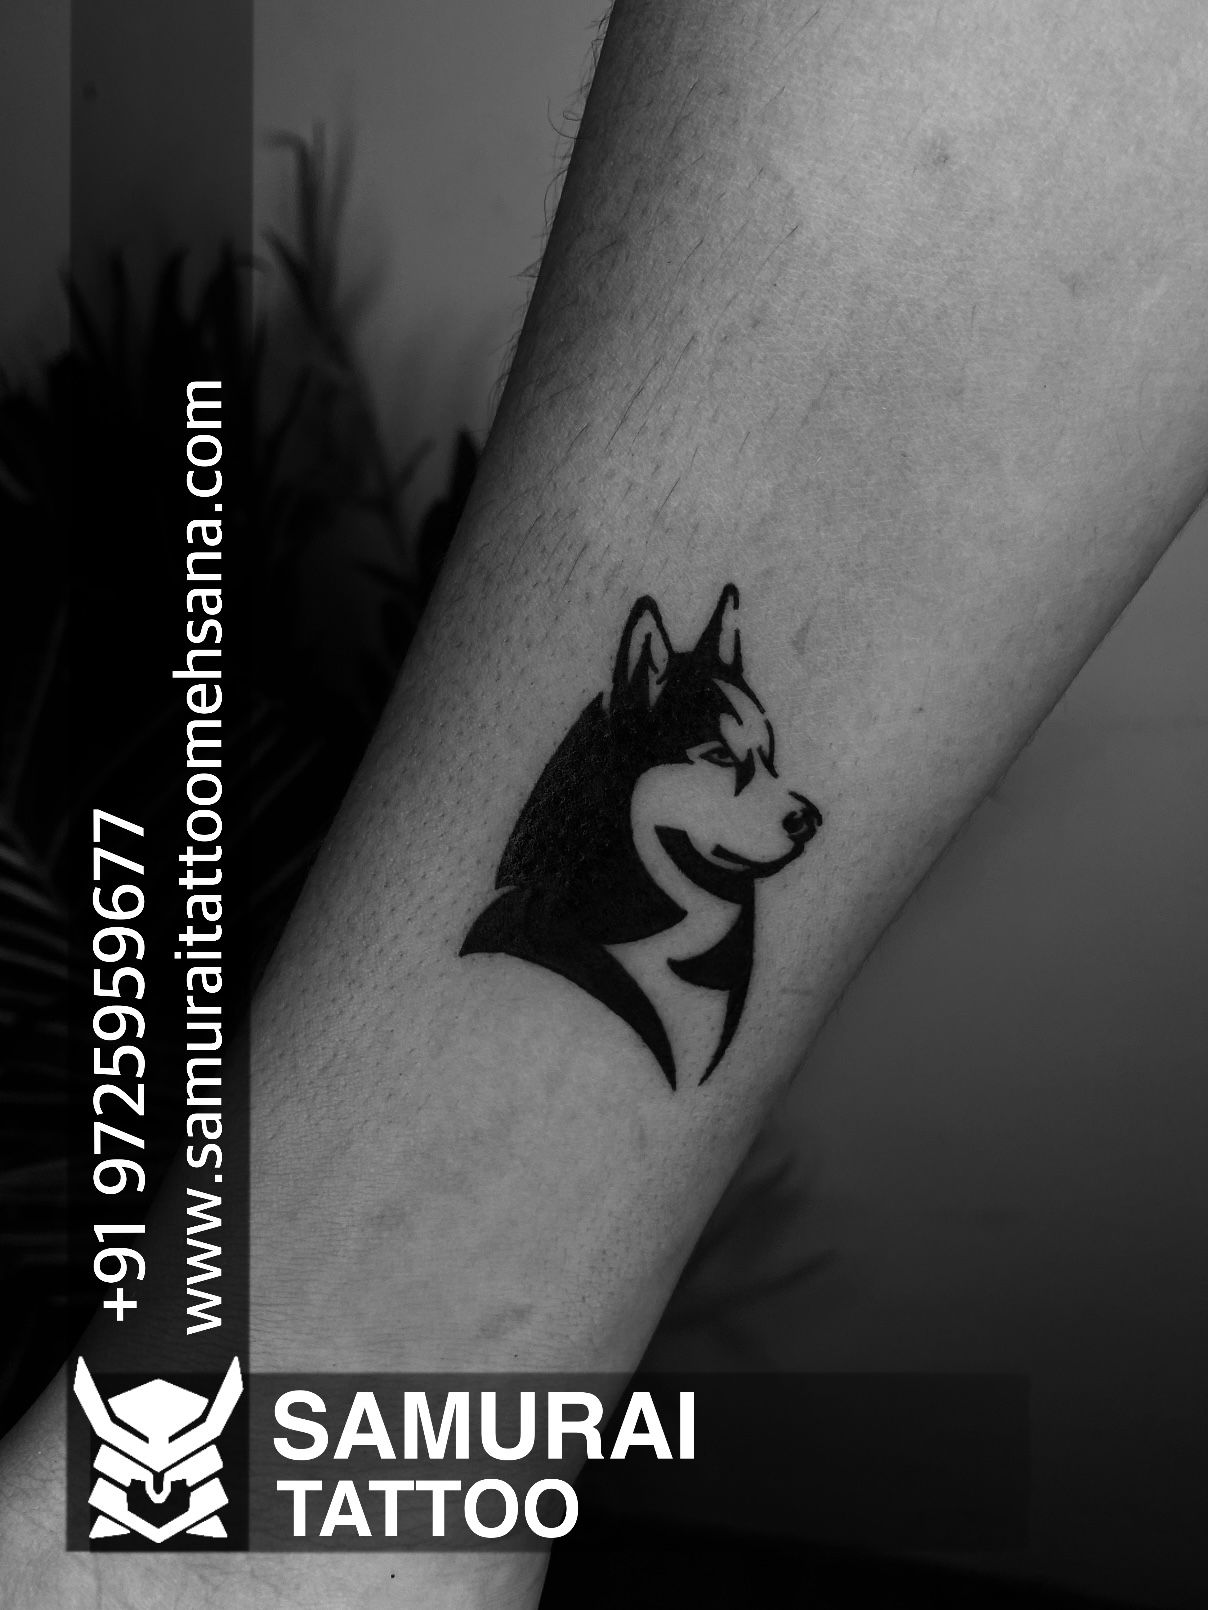 Husky portrait tattoo located on the inner forearm,